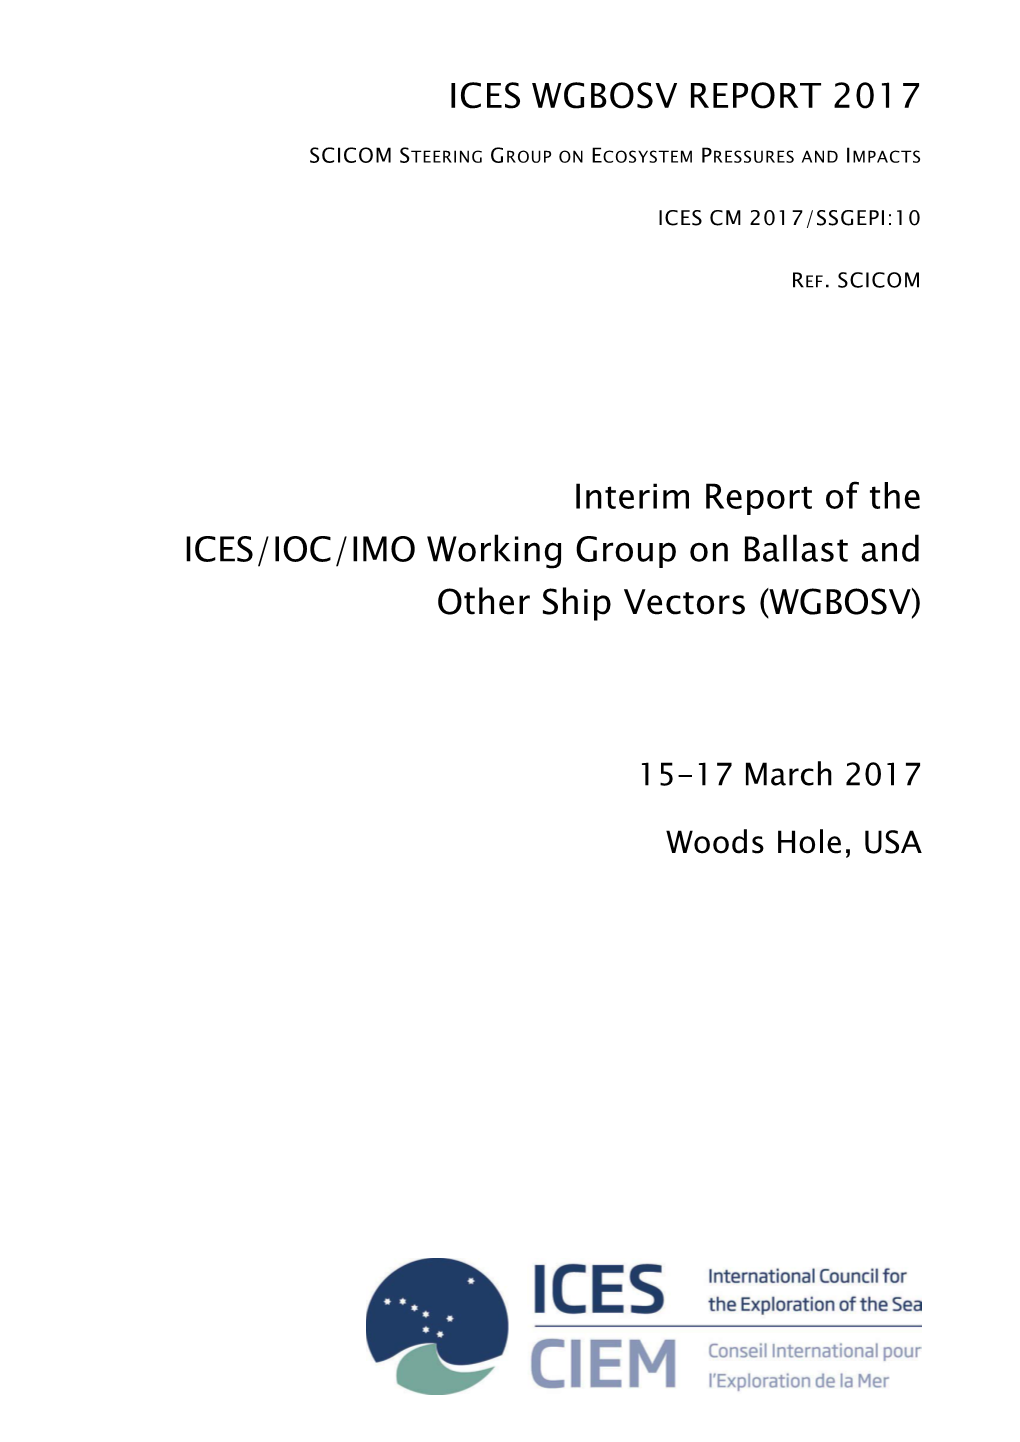 Report of the ICES-IOC-IMO Working Group on Ballast and Other Ship